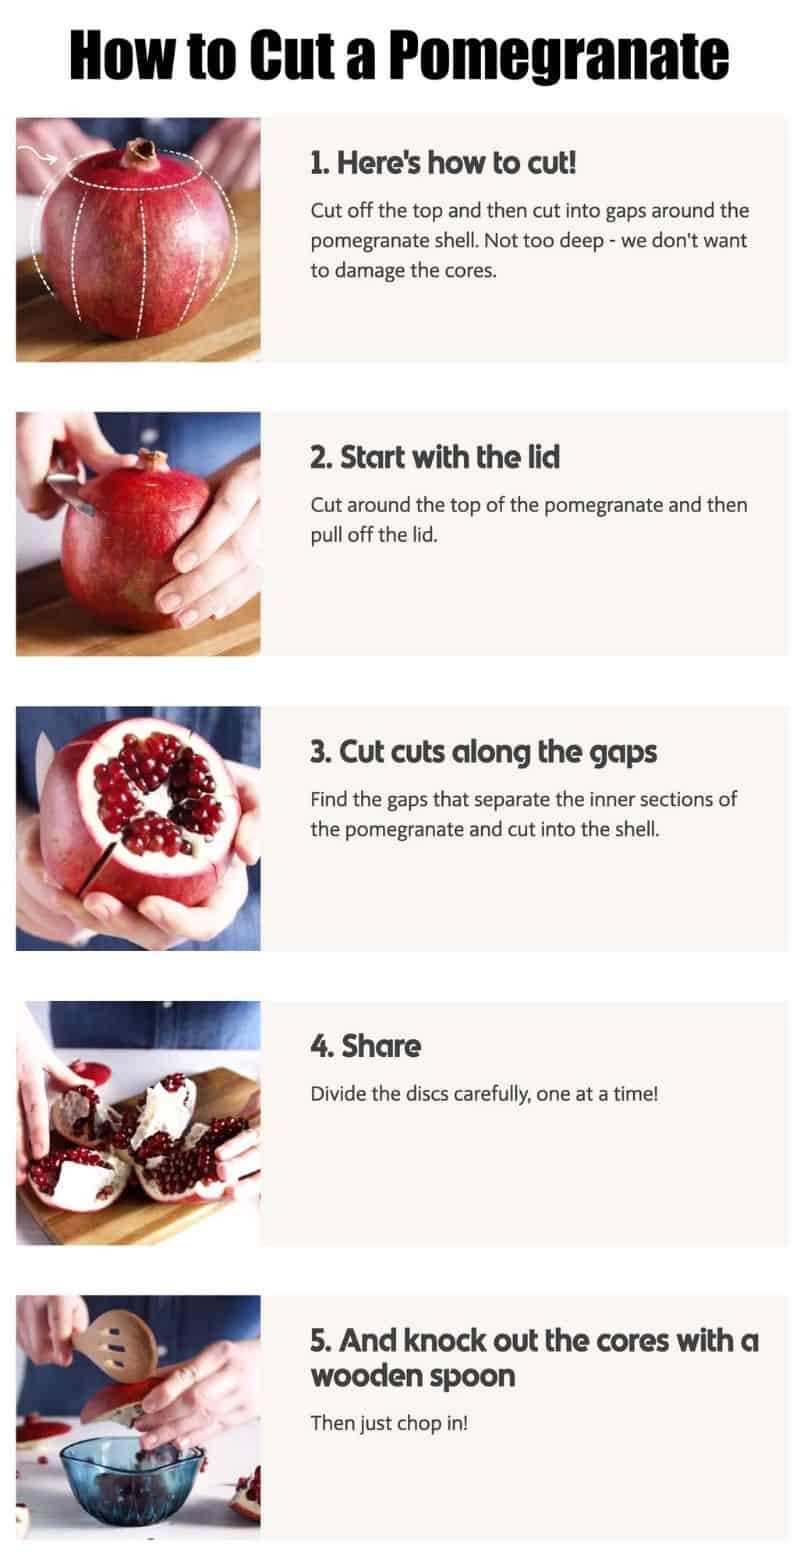 How to Cut a Pomegranate?